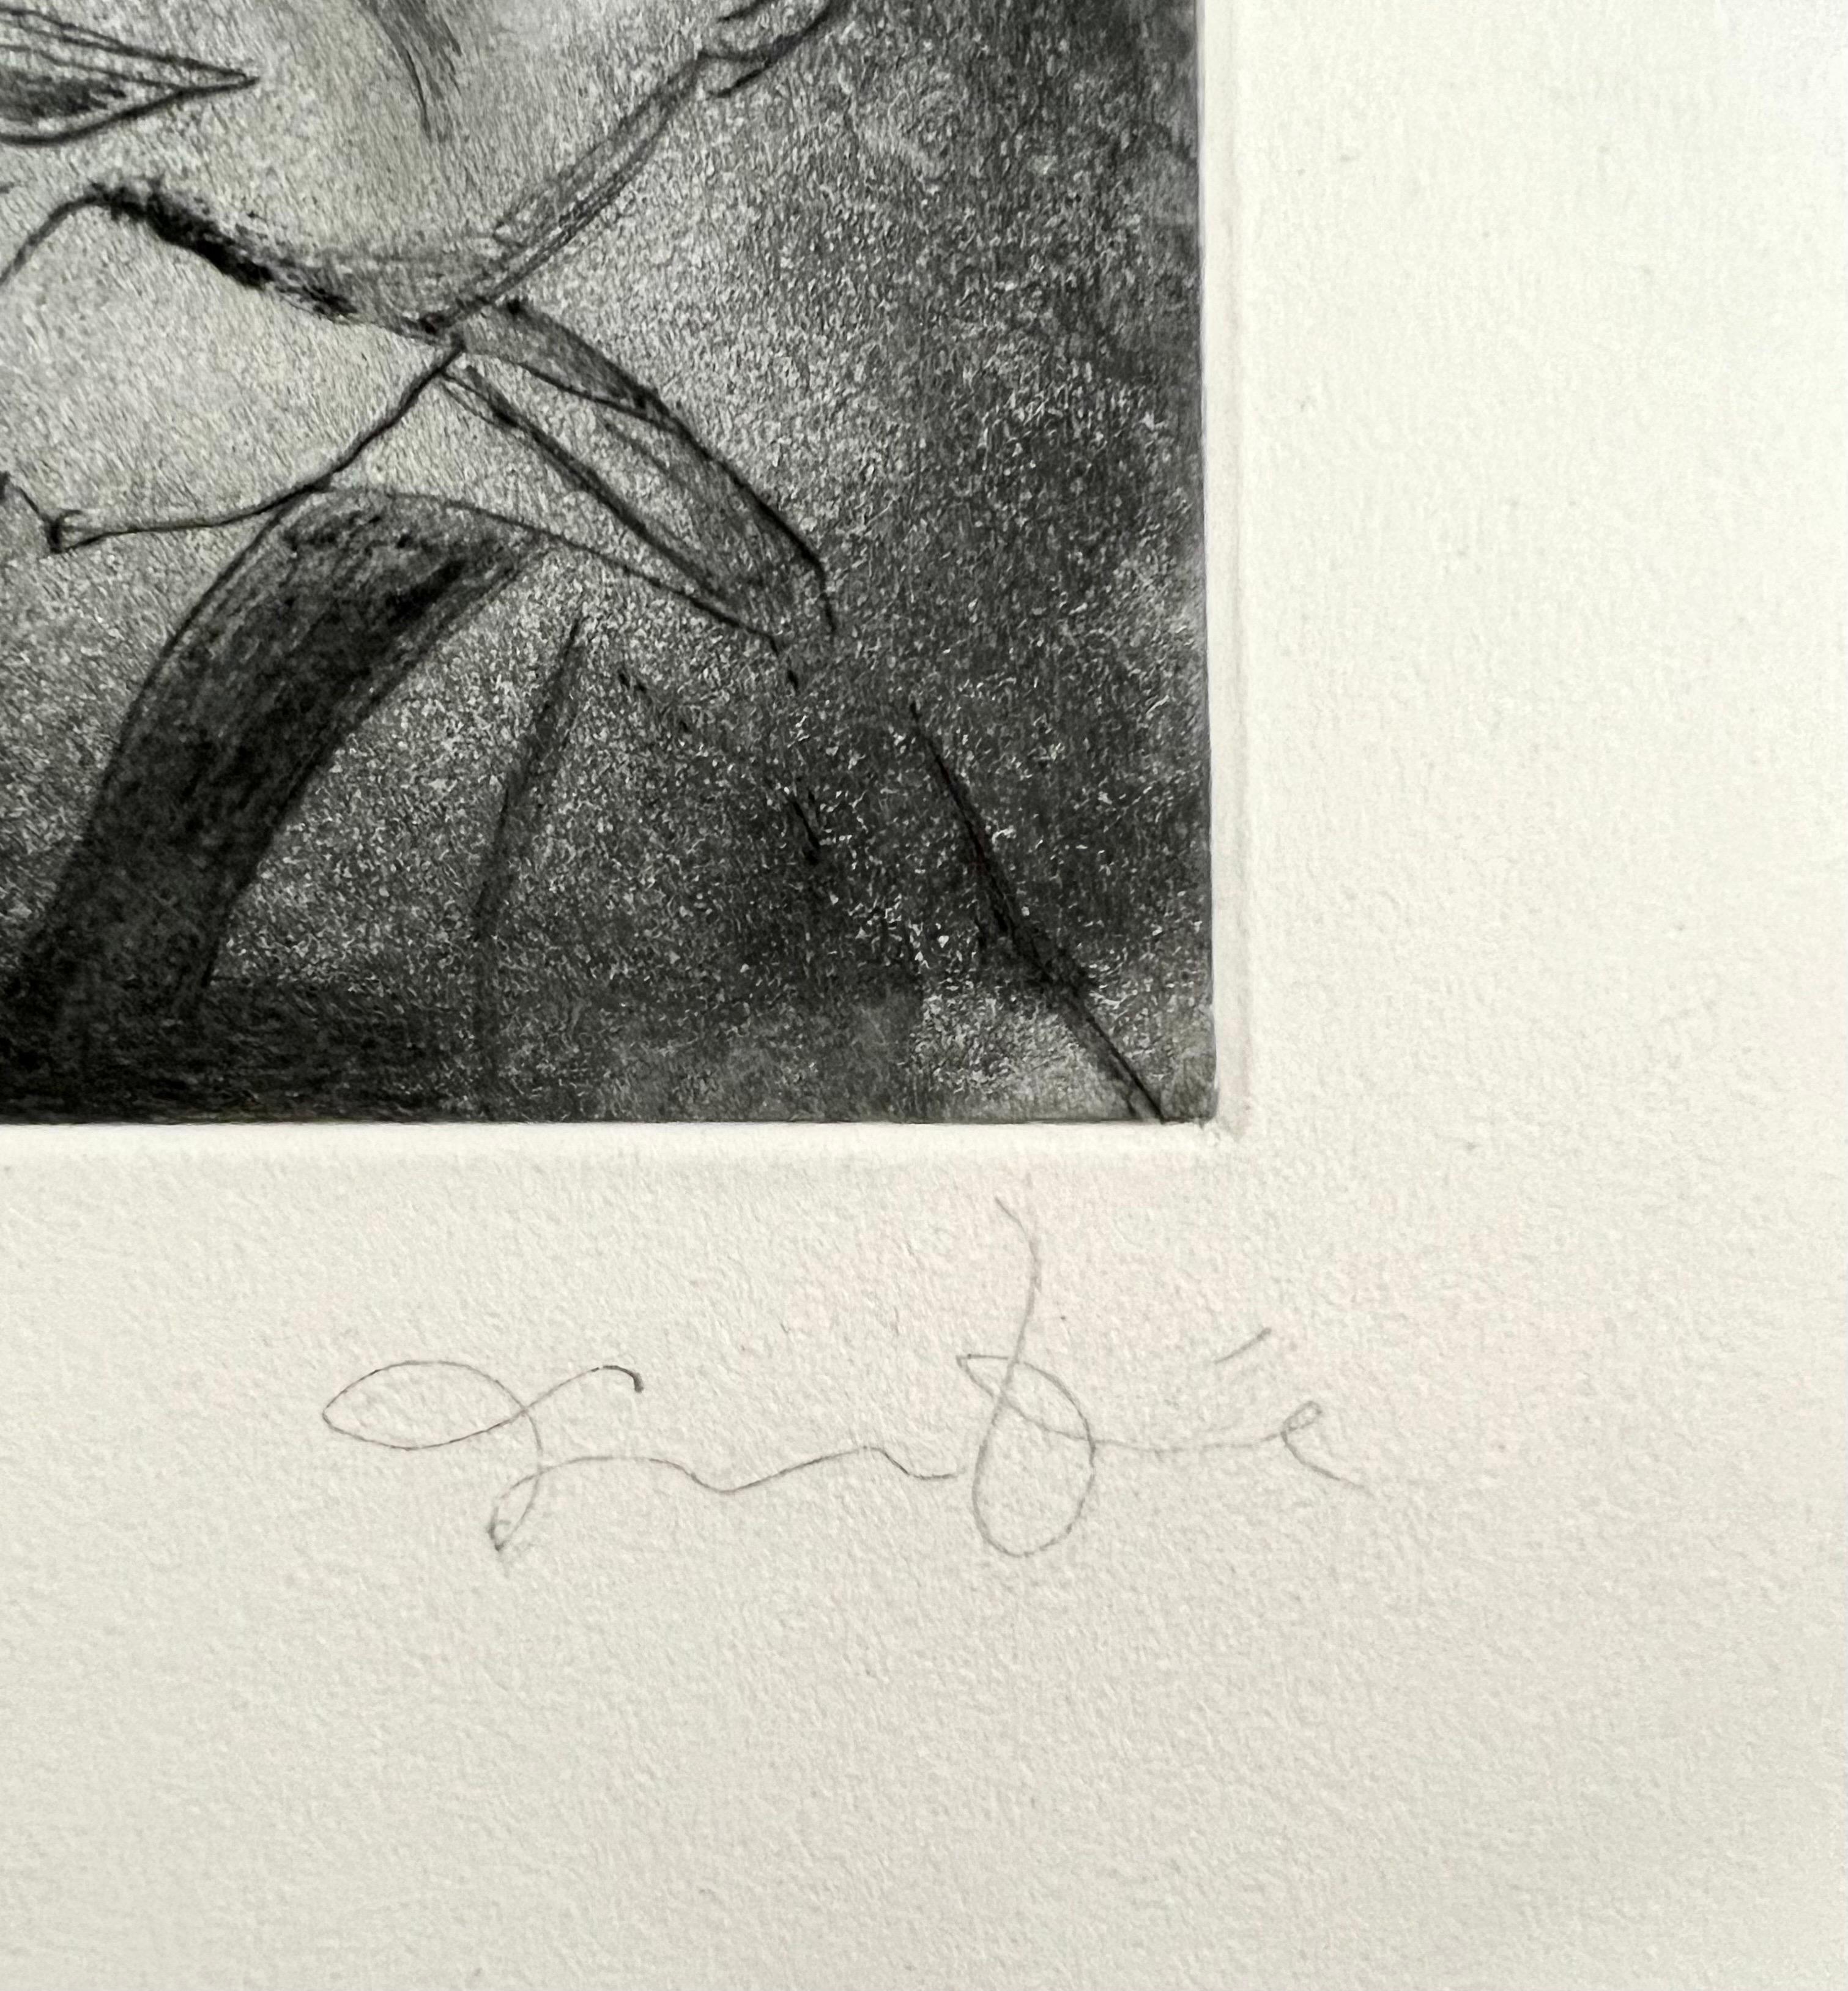 Jim Dine (American, b. 1935) 
Etching depicting Pinocchio
Published by Enitharmon Press for Whitman College, London 1999
Hand signed in pencil lower right. Measures 9